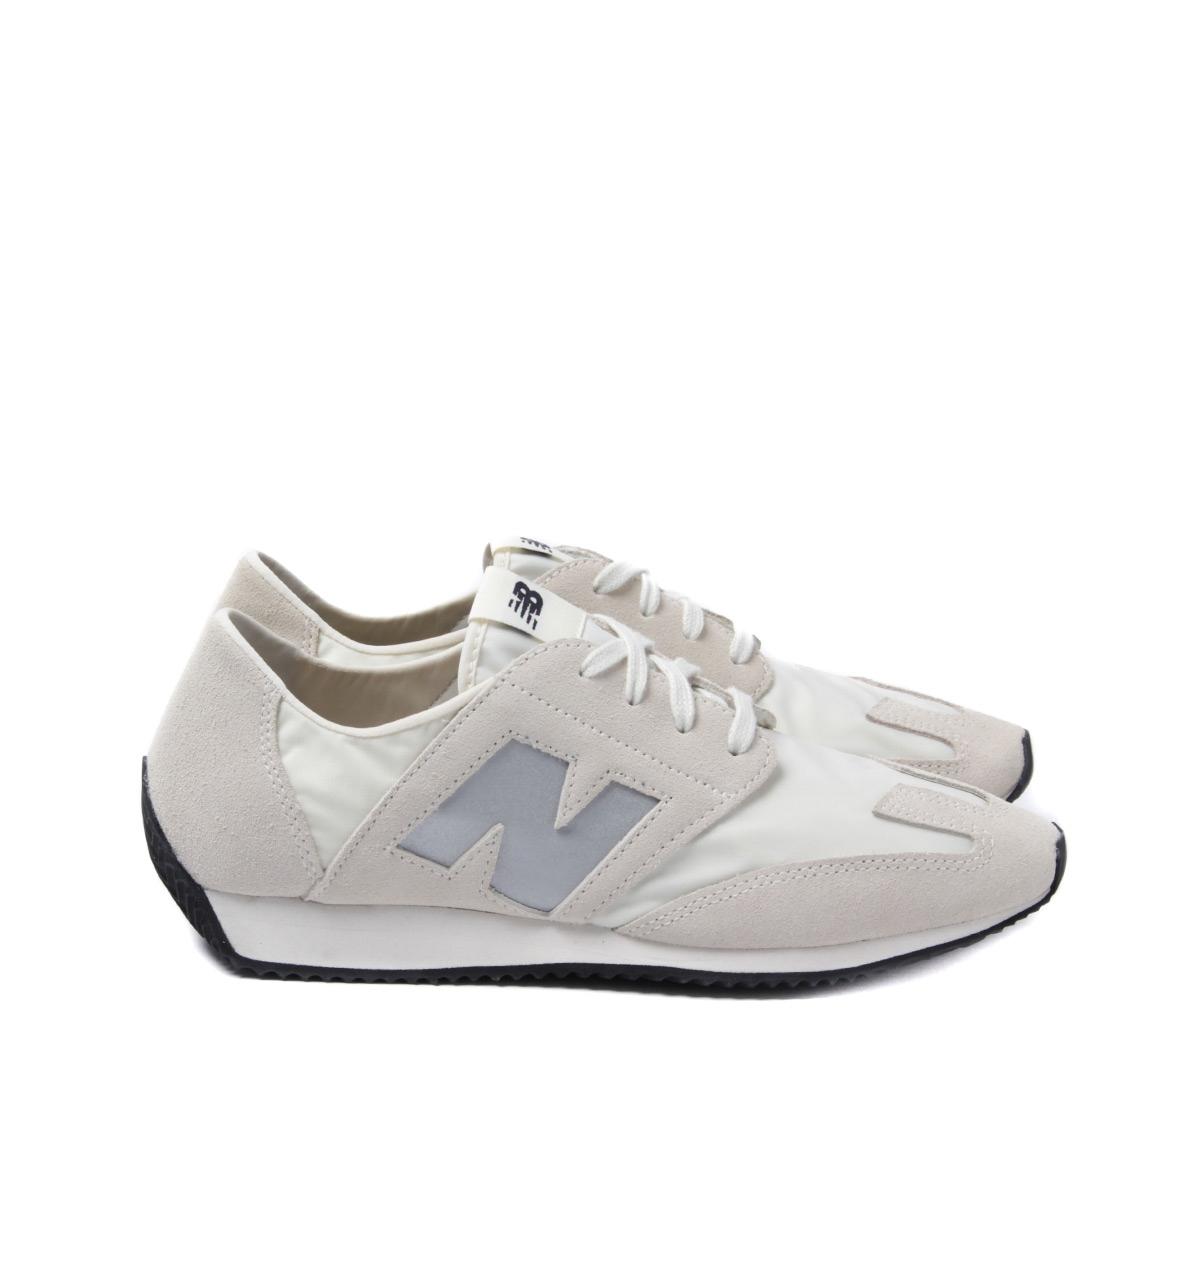 New Balance Suede 320 Beige Trainers in Natural for Men - Lyst